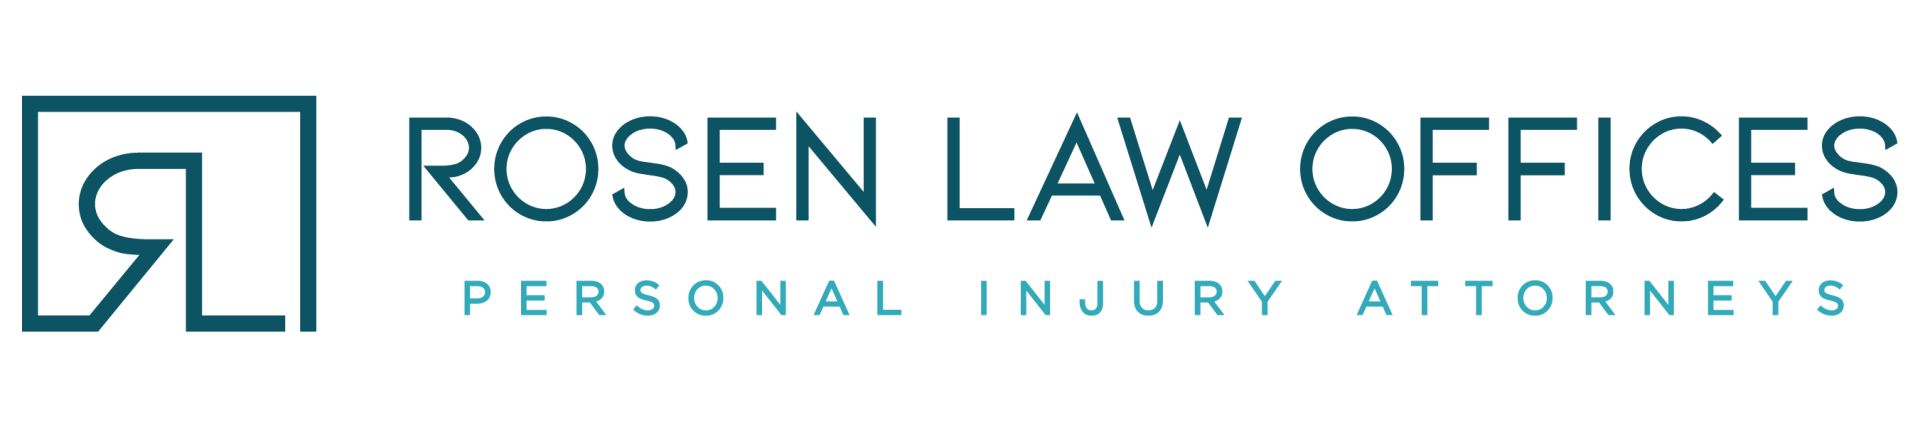 rosen law offices personal injury attorneys logo